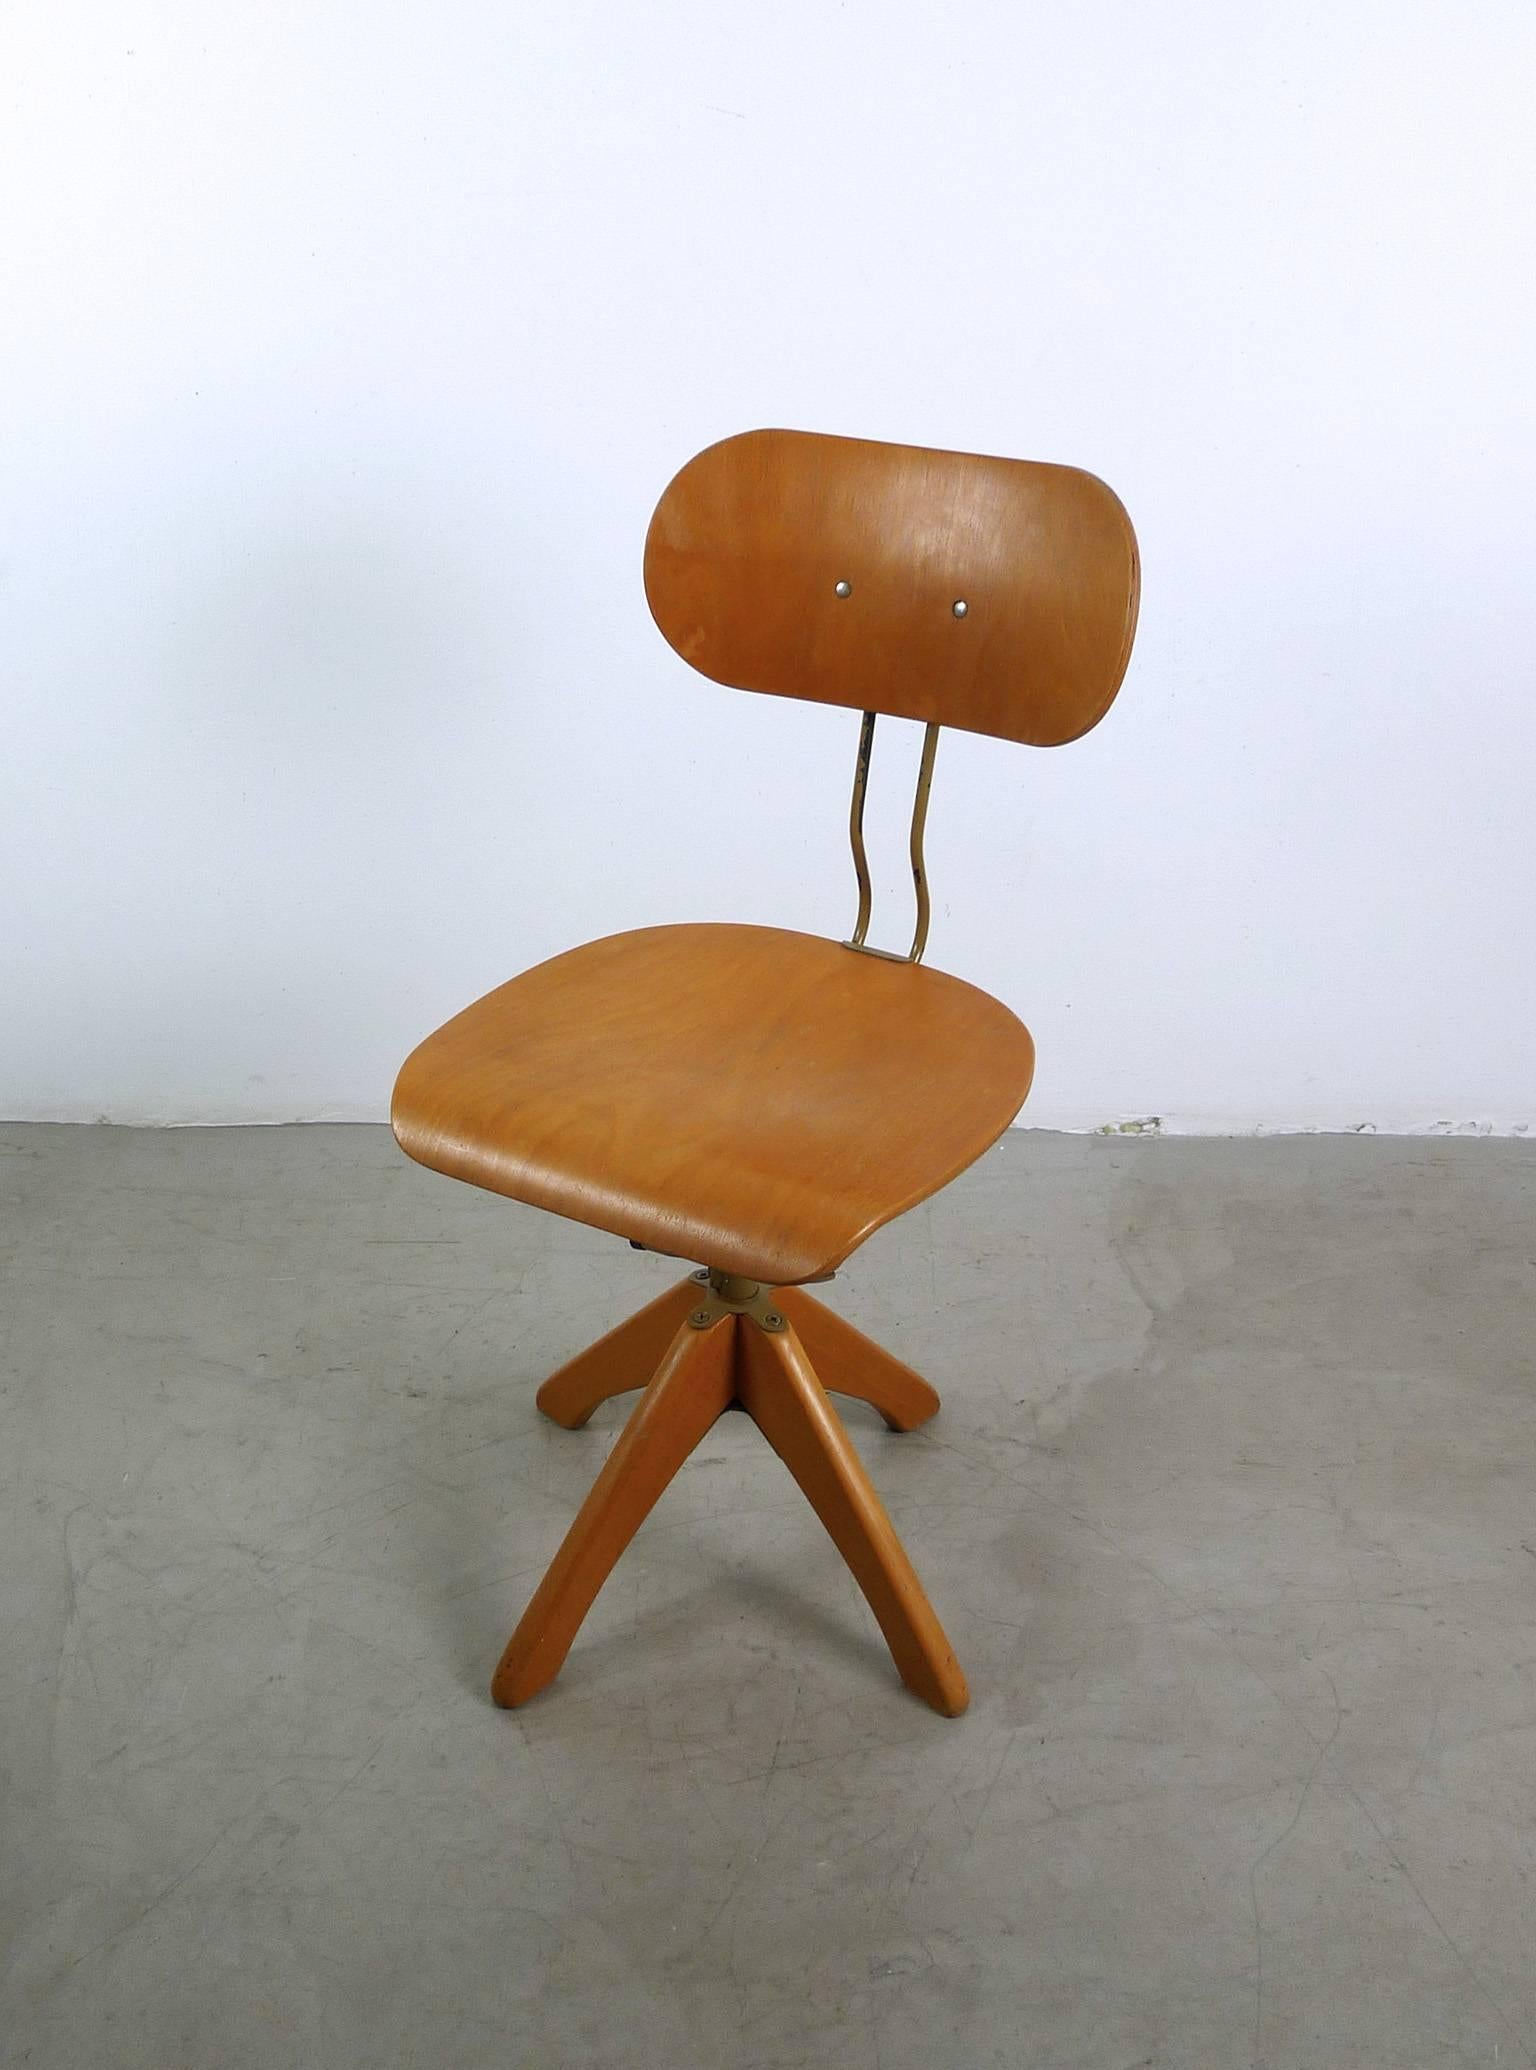 Variable swivel chair for architects designed by Margarete Klöber in the 1930s and produced by German manufacturer Polstergleich.
Seat and backrest are made of laminated beech wood. It features four steel springs under the seat for comfortable long